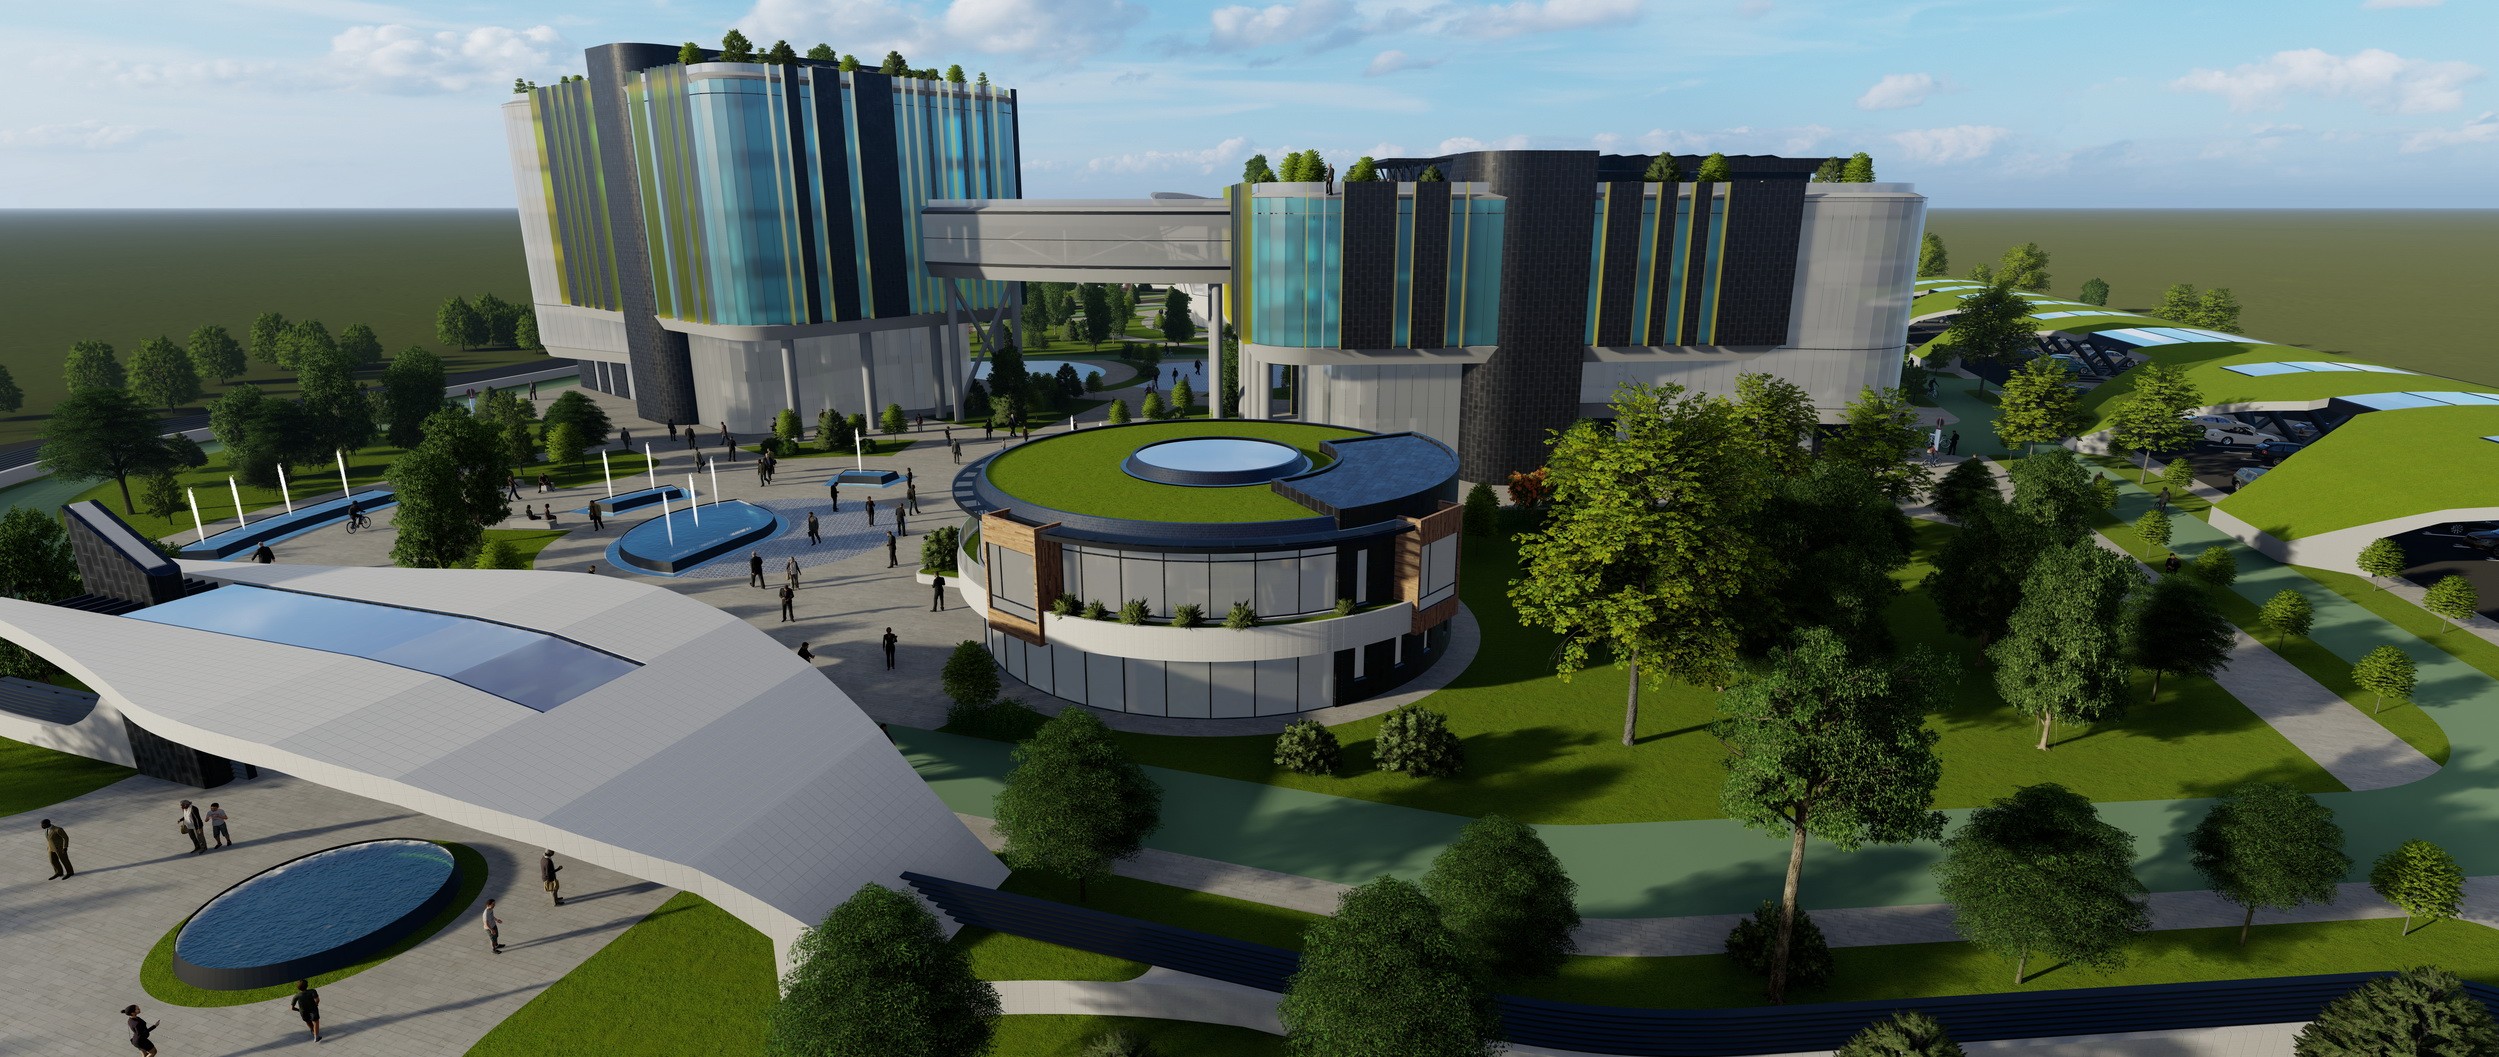 Veelancing and Măgurele Science Park Partner Up To Promote Ease of Access To The Latest Tech